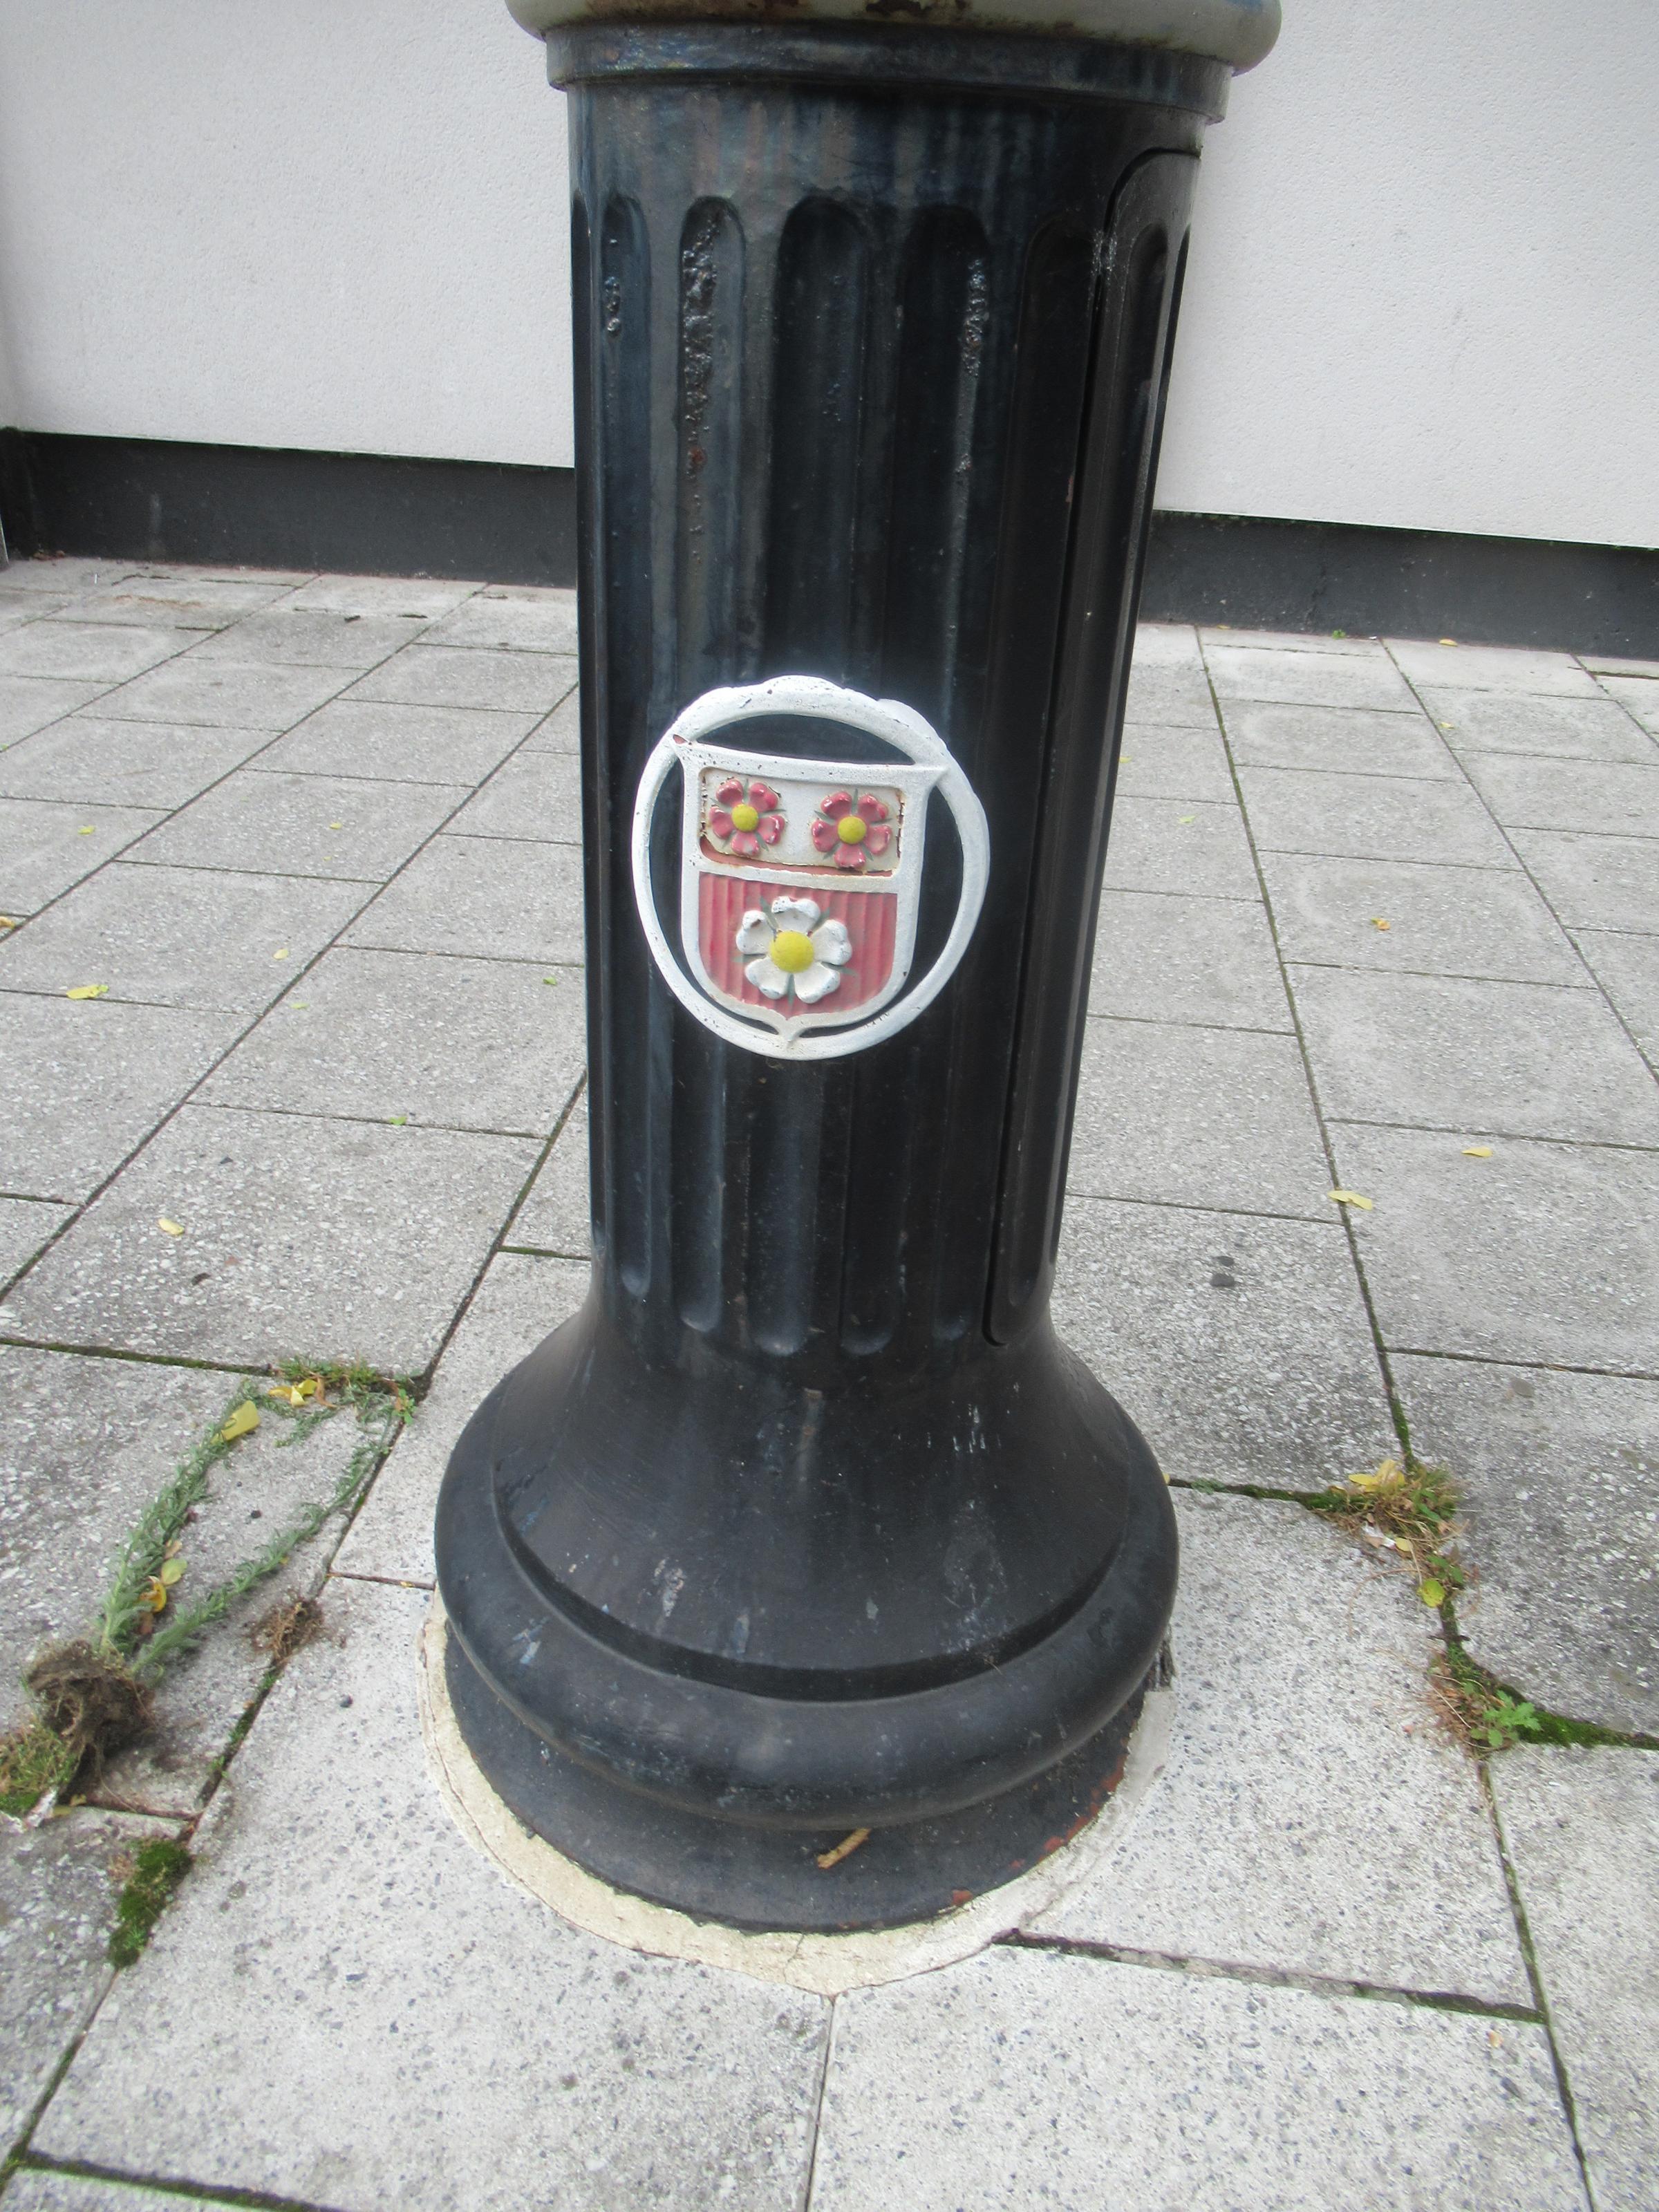 Town shield on tram power stanchion.